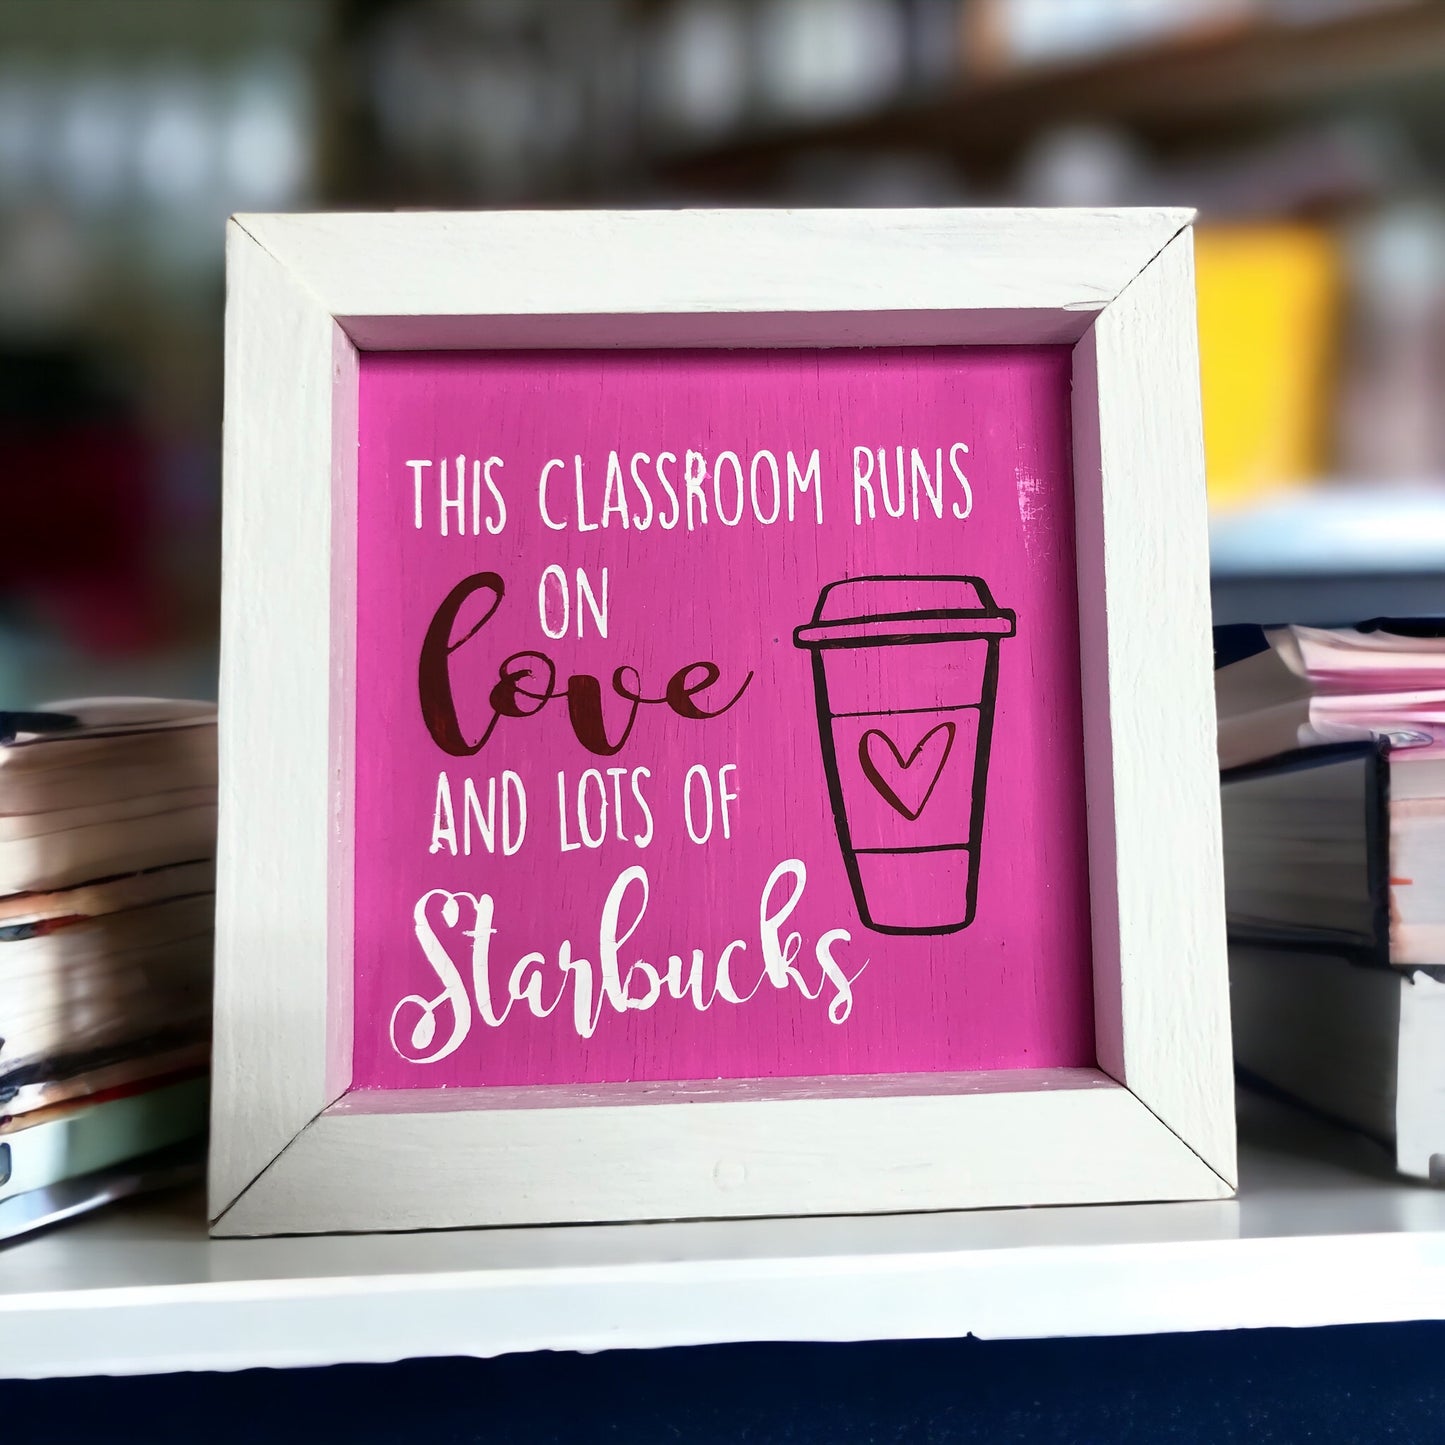 This classroom runs on love and lots of starbucks